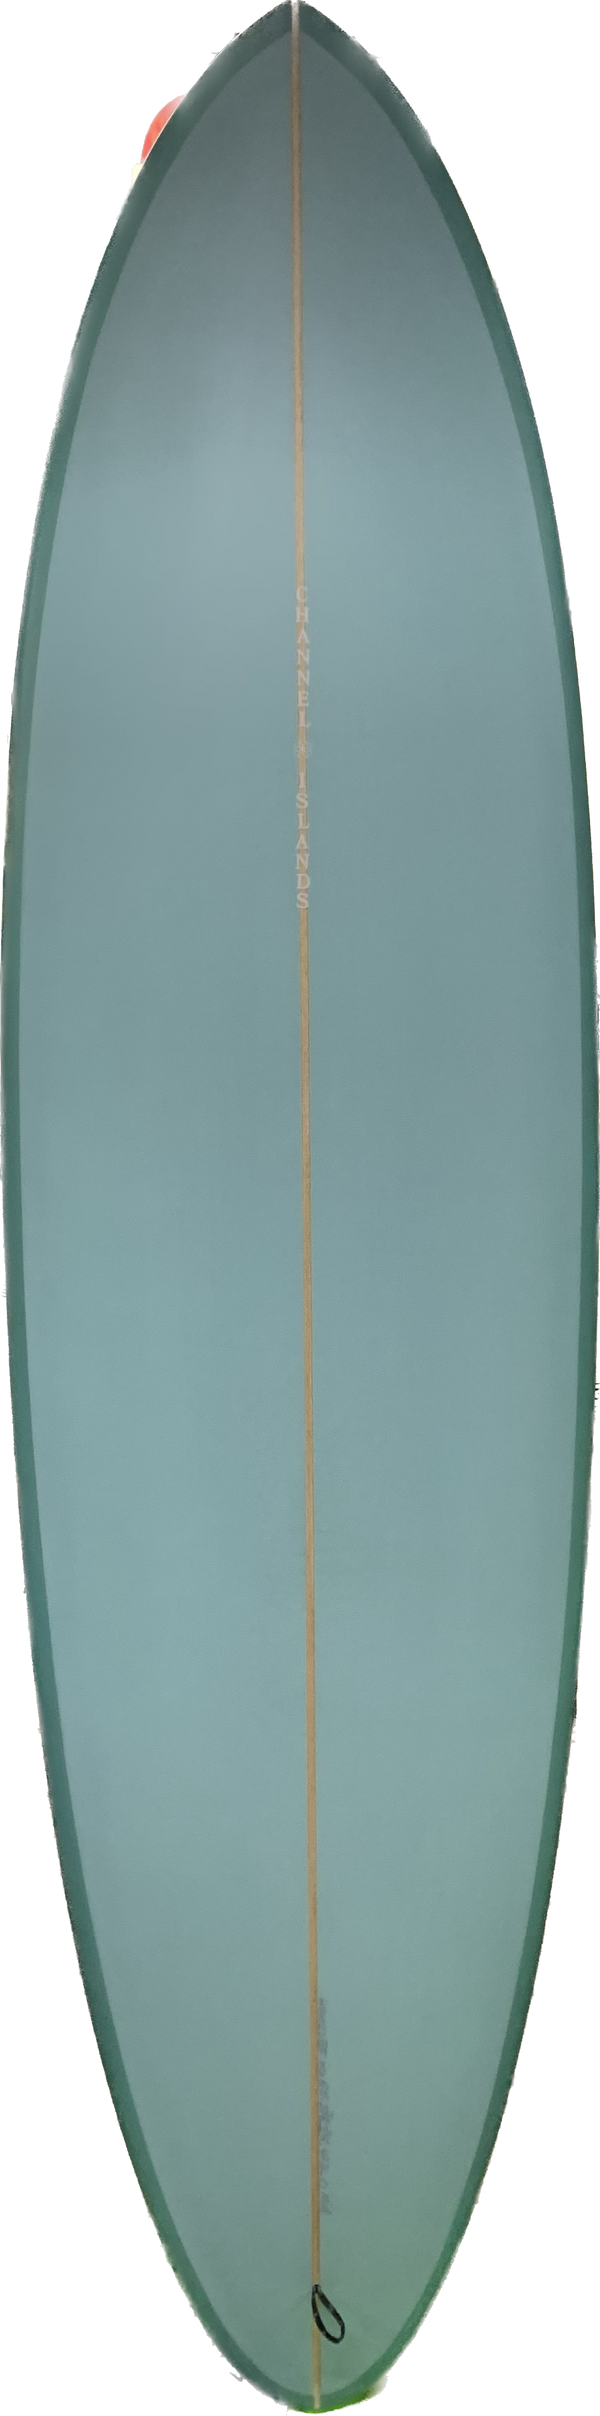 Channel Islands Surfboard Mid Length Turquoise 6'10